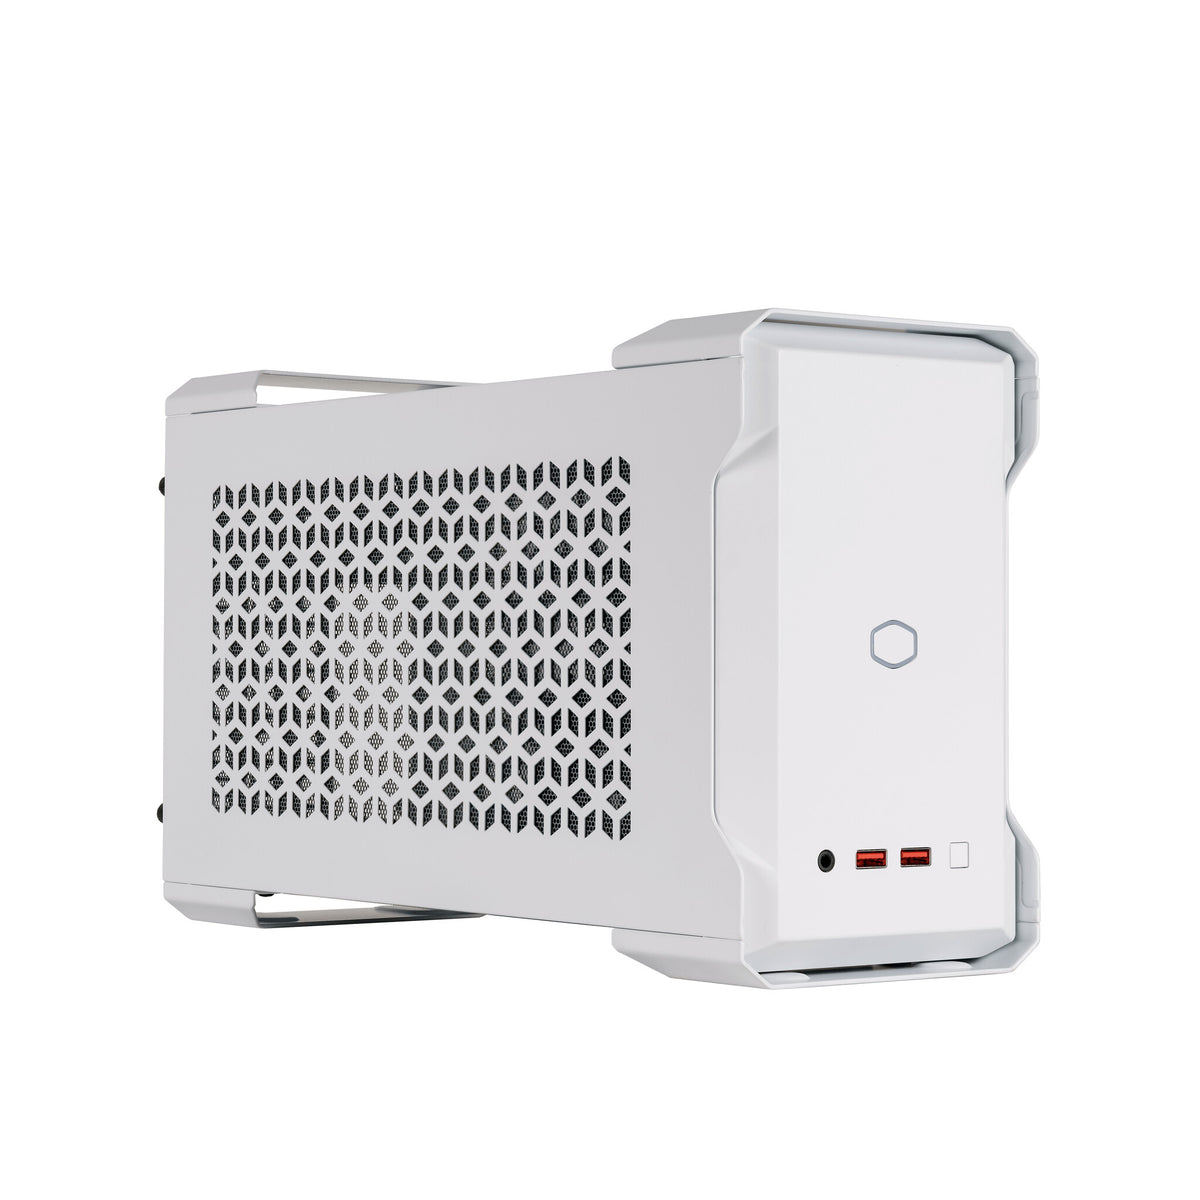 Cooler Master MasterCase NC100 Small Form Factor Case in White